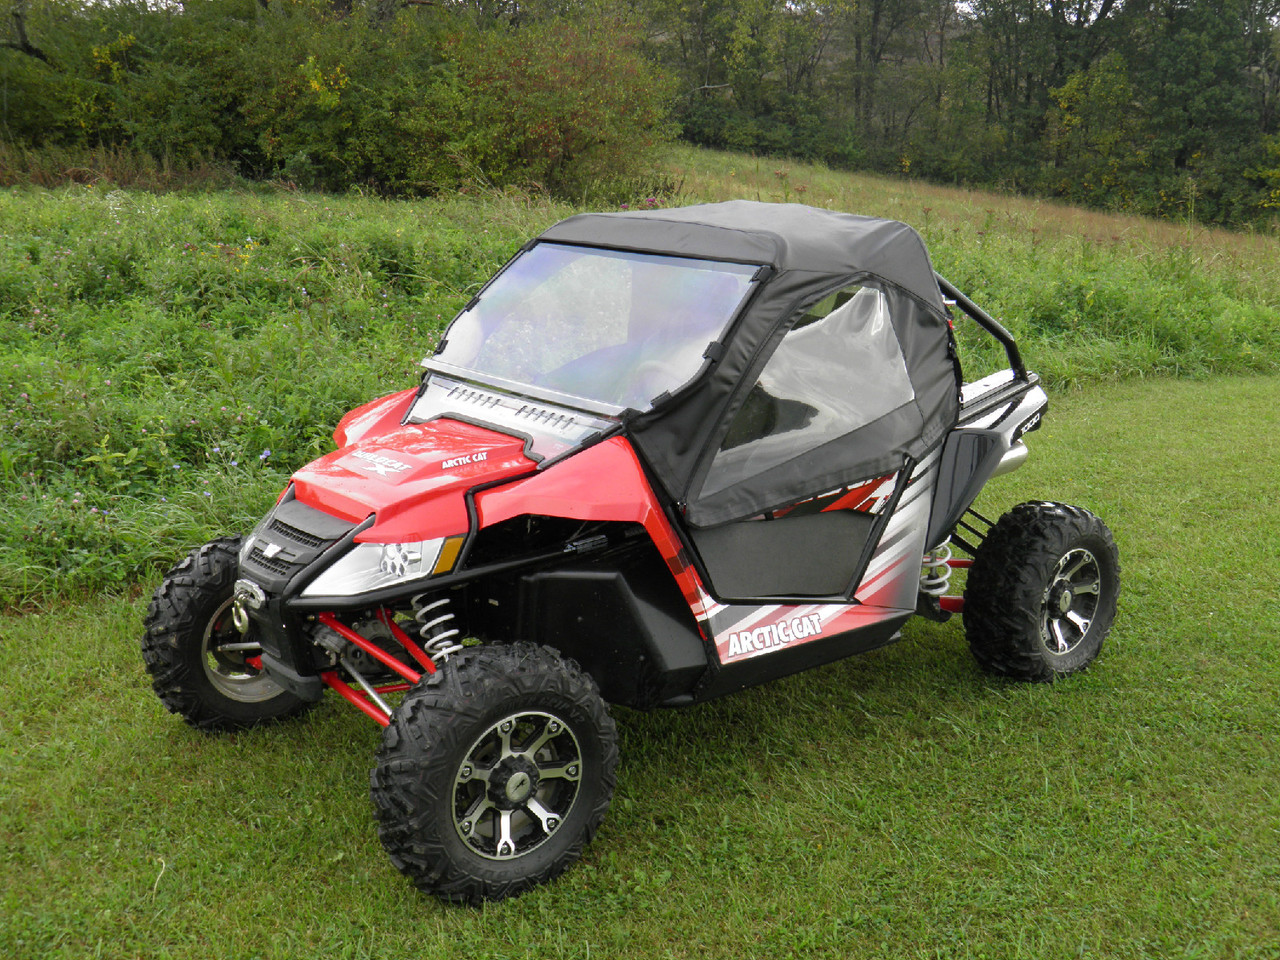 3 Star, side x side, side by side, utv, sxs, accessories, arctic cat, textron, wildcat, x, 1000, wildcat x, wildcat 1000, doors, front and side angle view